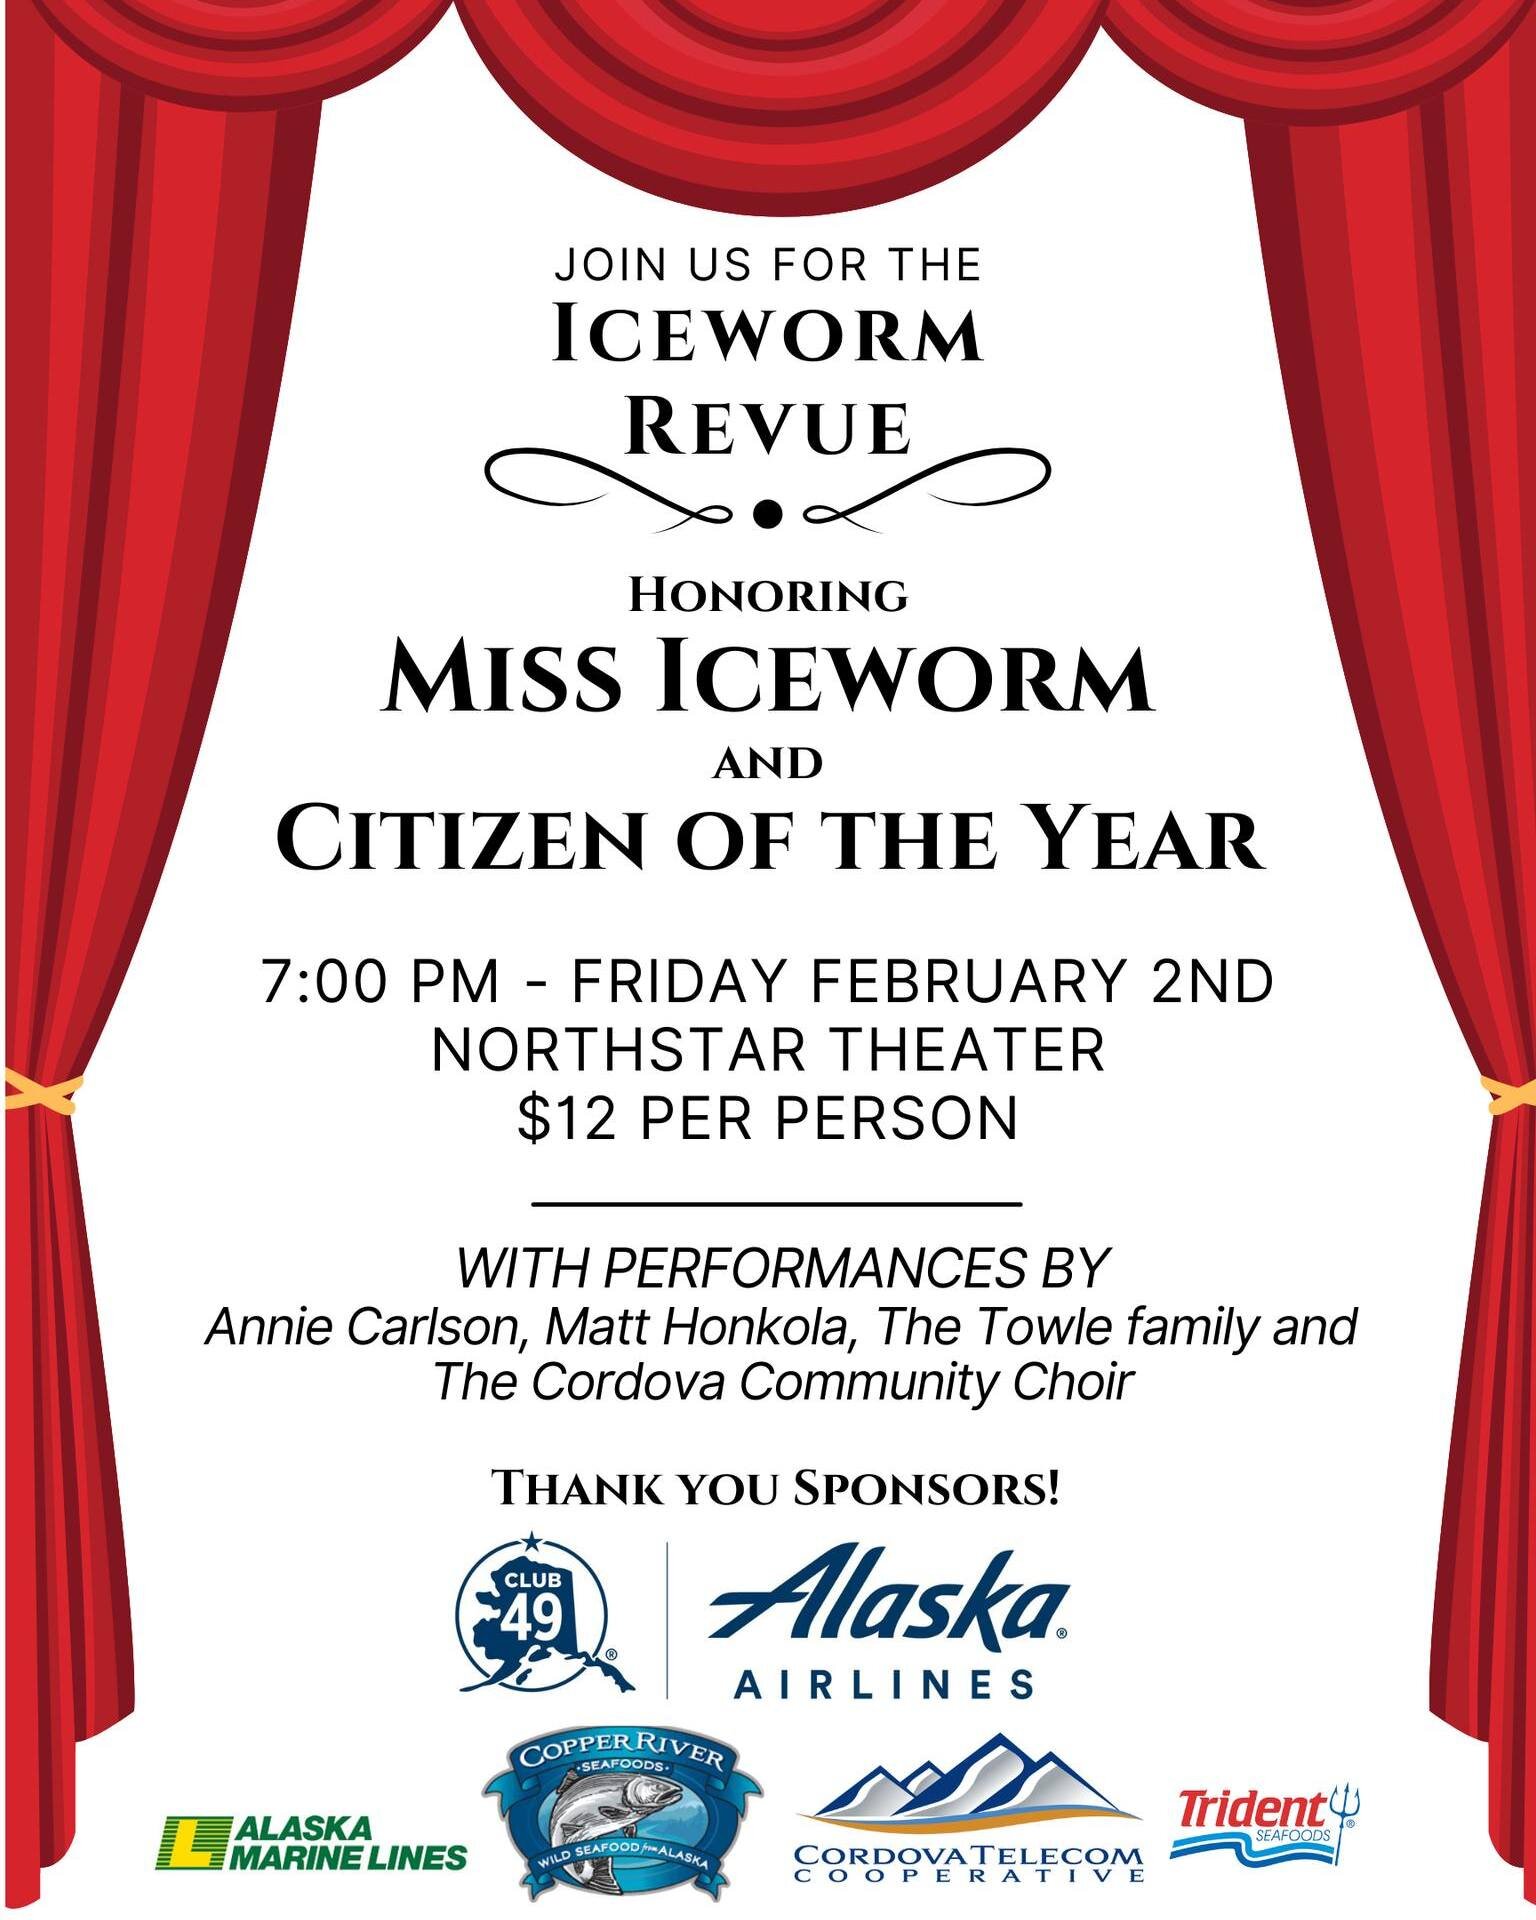 Join us for a nice evening out at the Cordova Center with performances by local legends, to honor the crowning of Miss Iceworm and the reveal of the Citizen of the Year! This event will be uploaded to our you tube page after the event. 
A big thank y